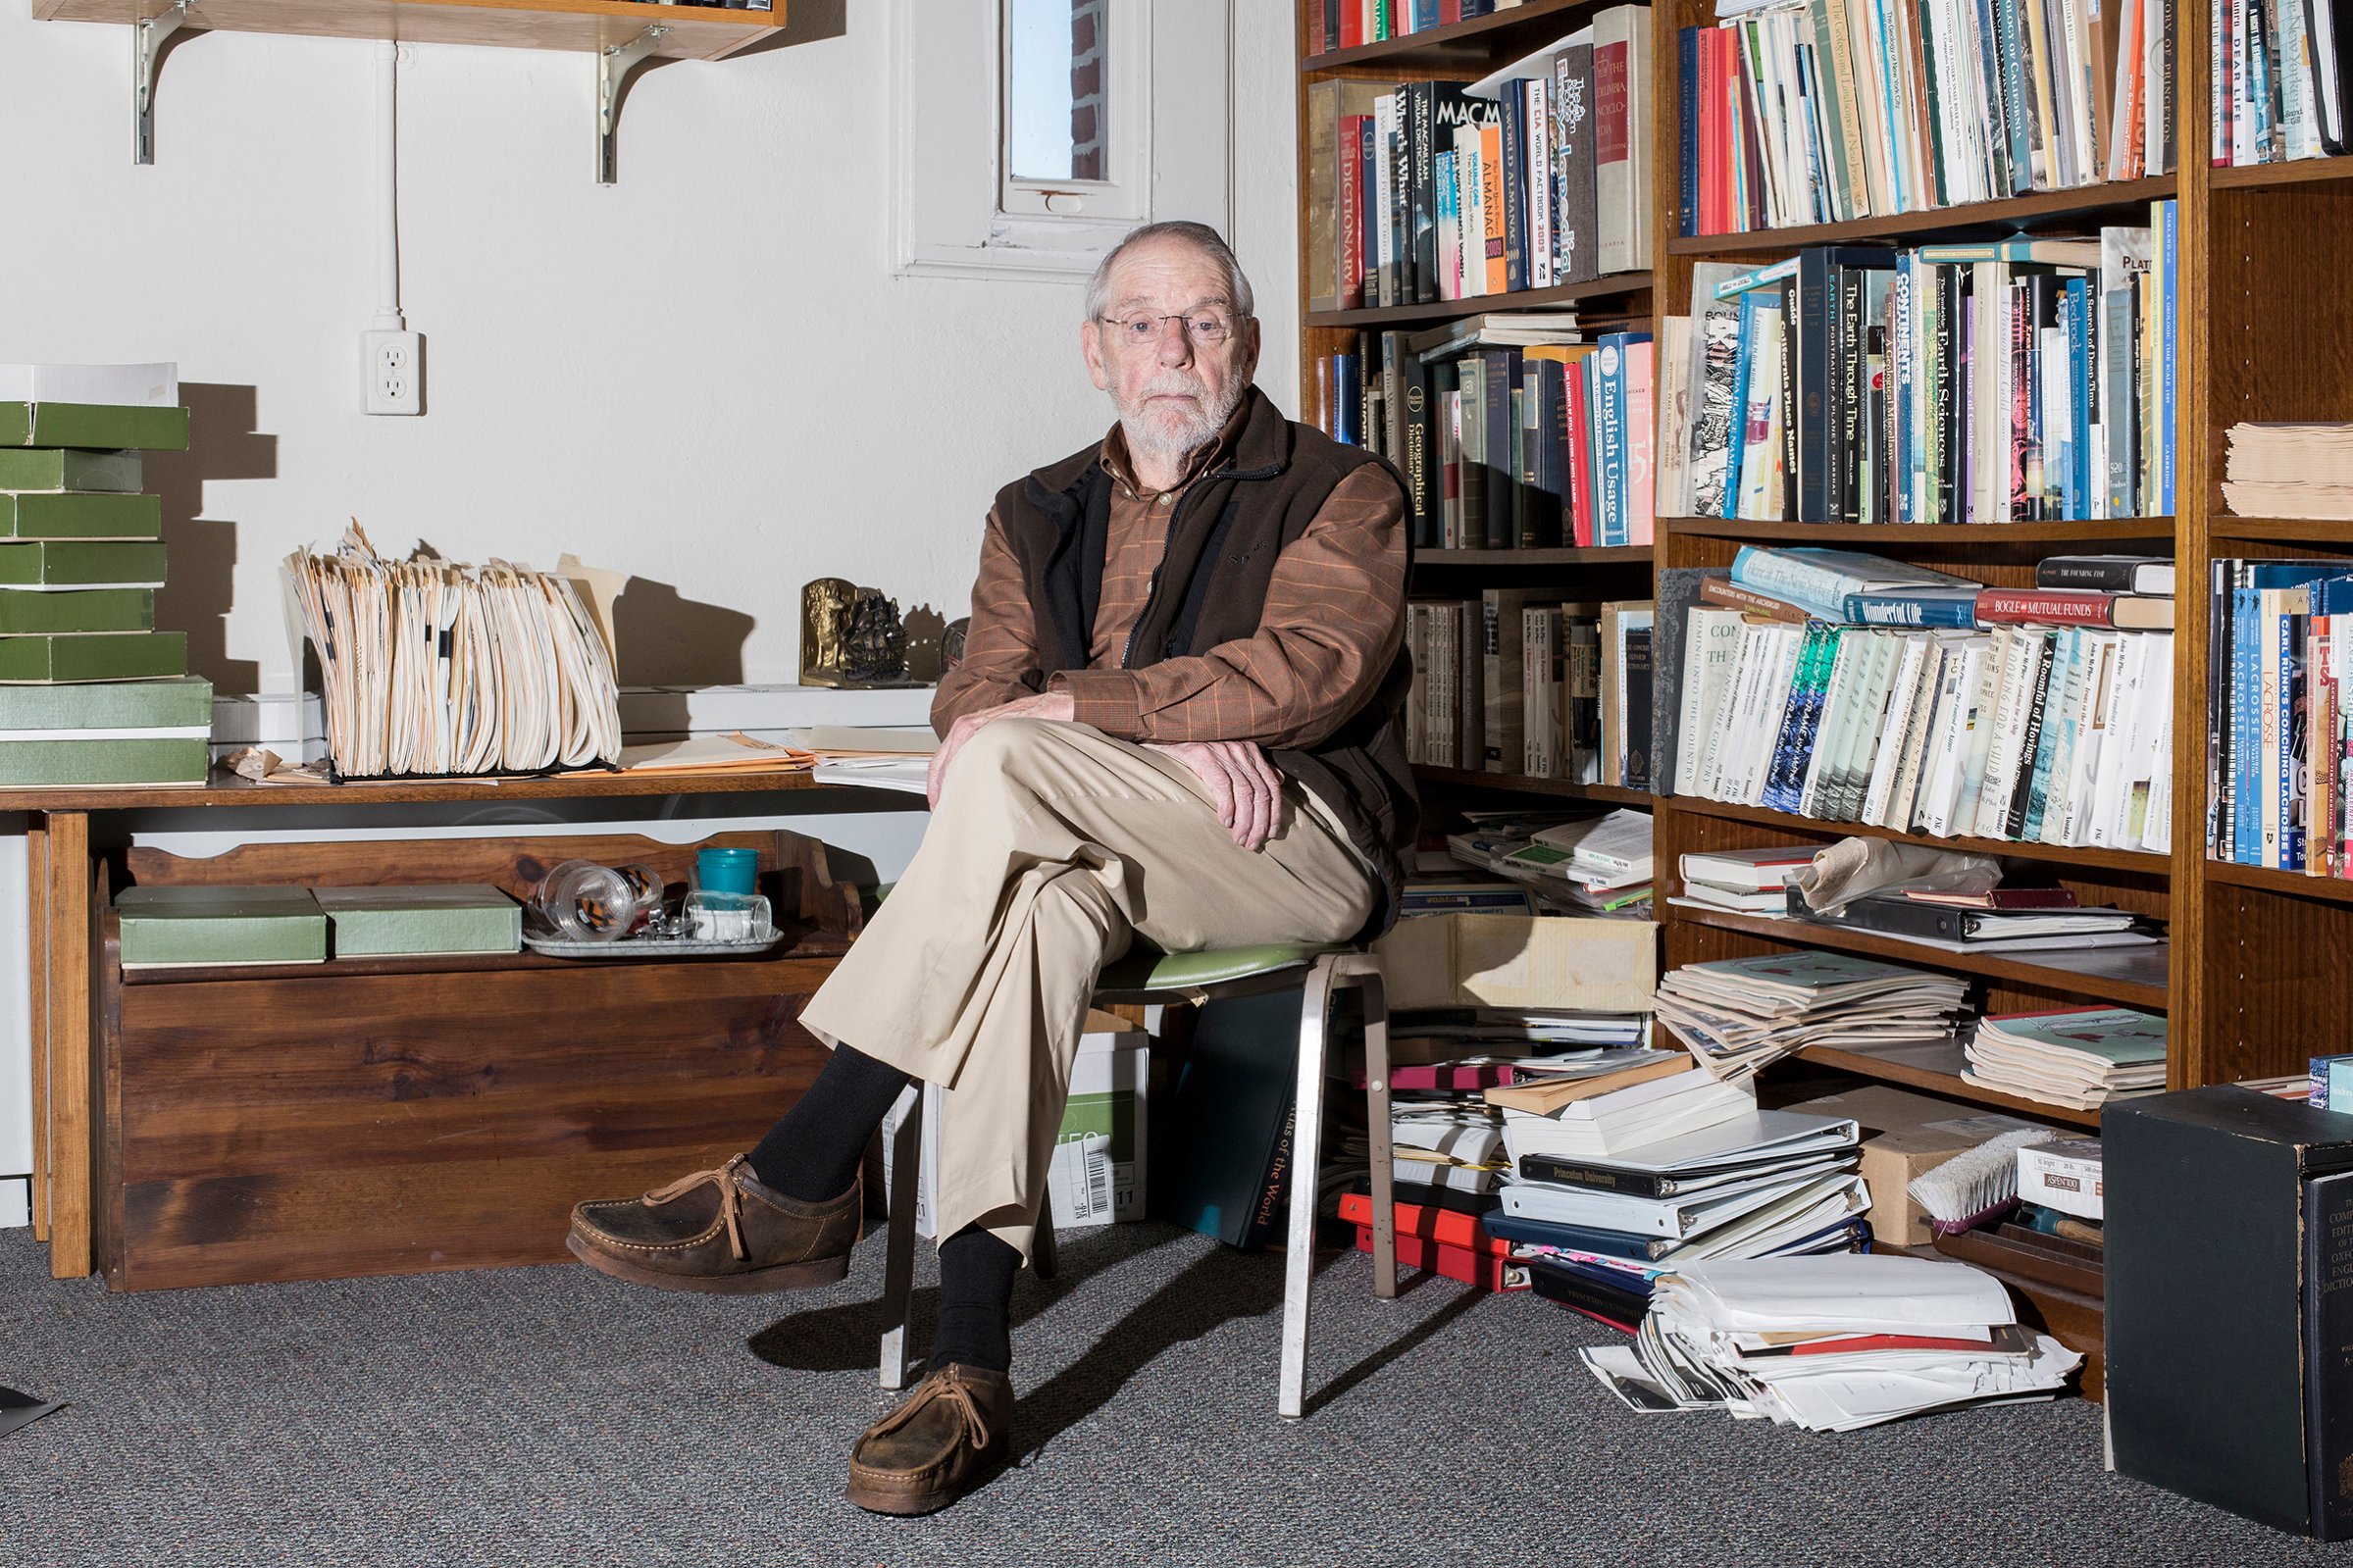 Writer John McPhee poses for a portrait in his office in Guyot Hall at Princeton University in Princeton, N.J., on Monday, December 3, 2018.